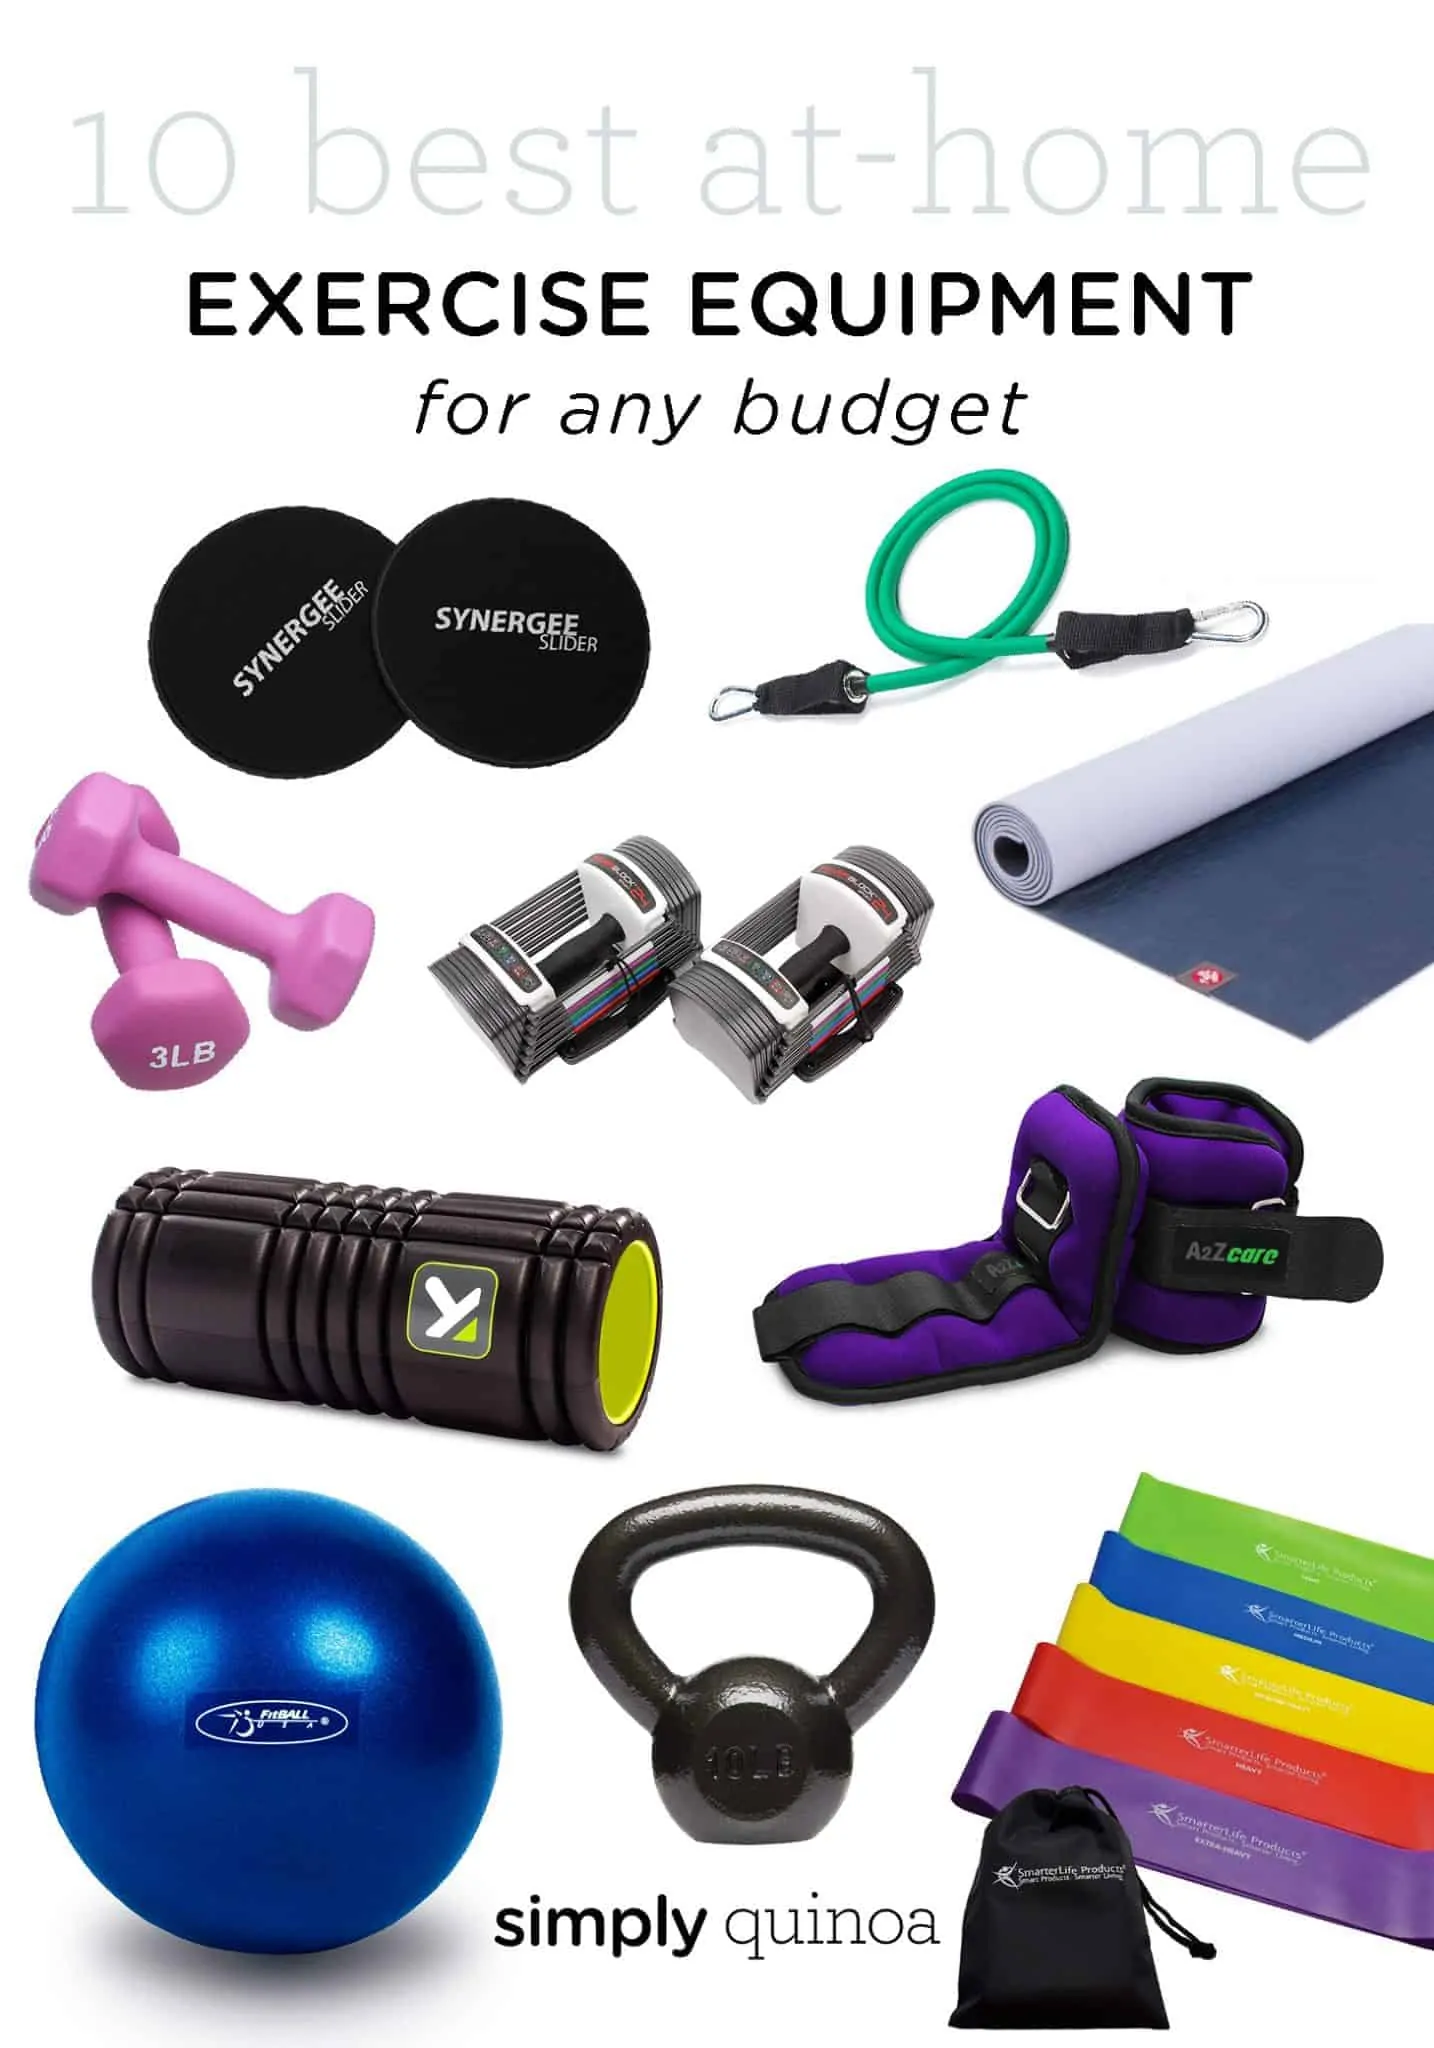 10 BEST at home exercise equipment for small spaces